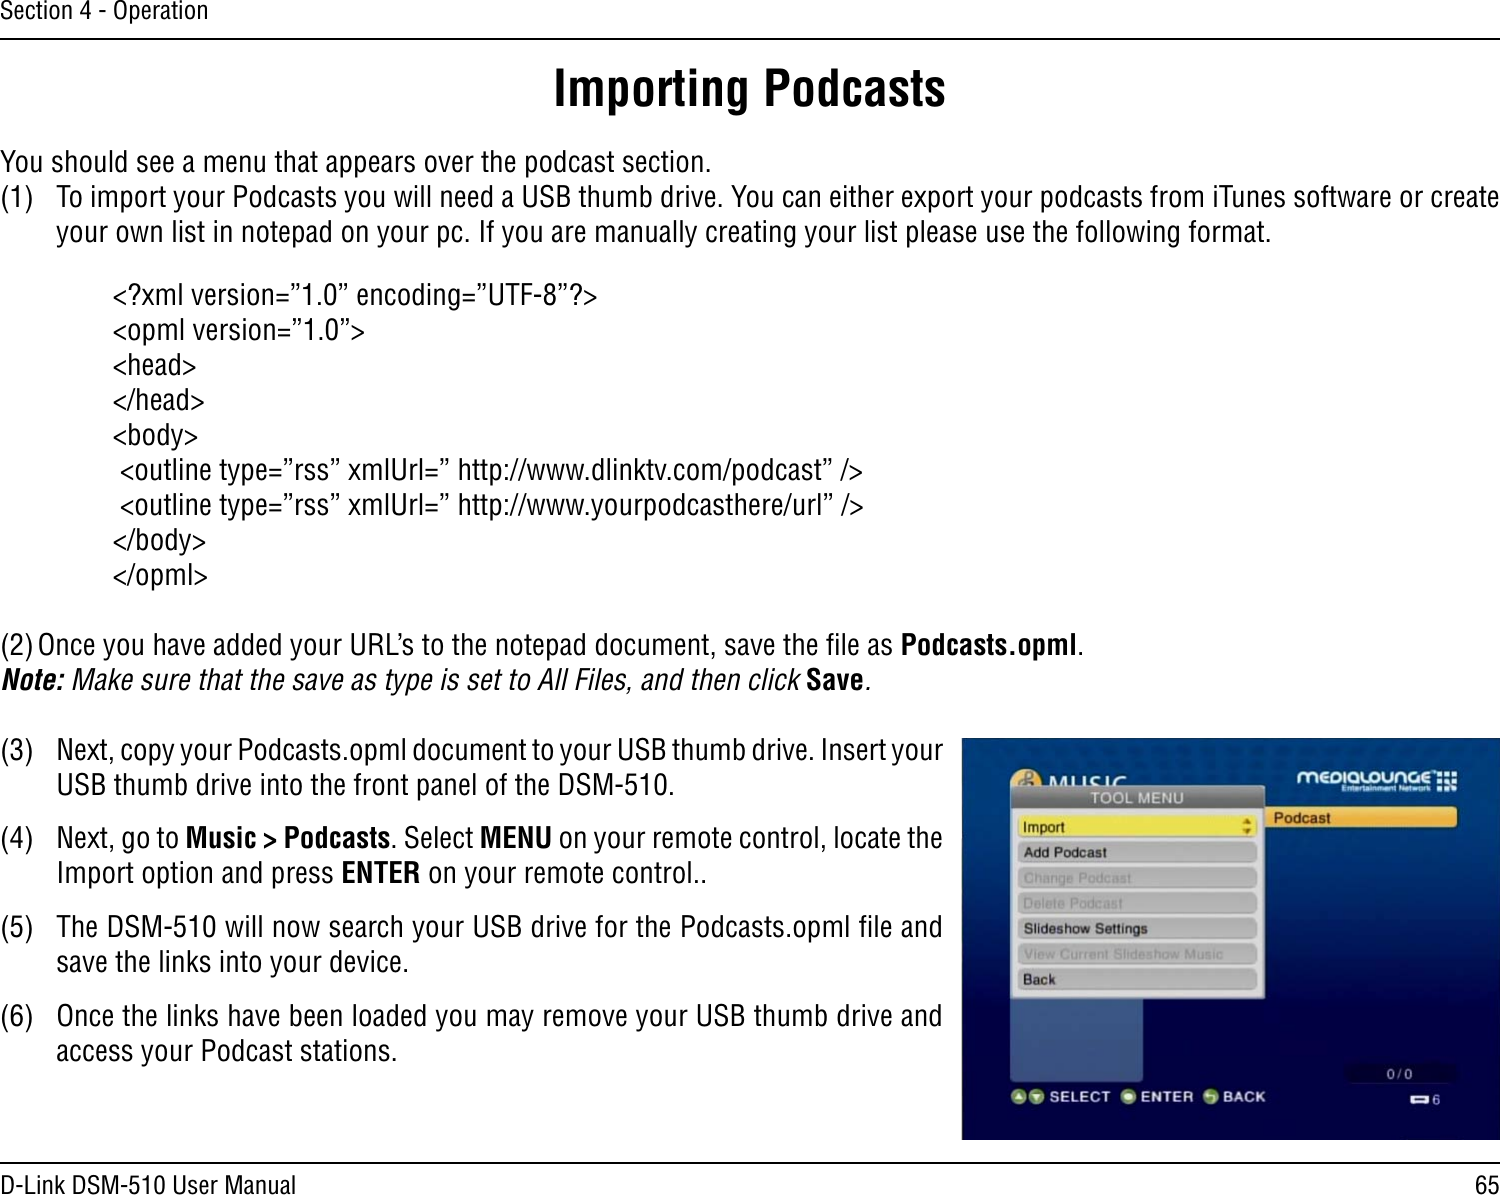 65D-Link DSM-510 User ManualSection 4 - OperationYou should see a menu that appears over the podcast section.(1)  To import your Podcasts you will need a USB thumb drive. You can either export your podcasts from iTunes software or create your own list in notepad on your pc. If you are manually creating your list please use the following format.&lt;?xml version=”1.0” encoding=”UTF-8”?&gt;&lt;opml version=”1.0”&gt;&lt;head&gt;&lt;/head&gt;&lt;body&gt; &lt;outline type=”rss” xmlUrl=” http://www.dlinktv.com/podcast” /&gt; &lt;outline type=”rss” xmlUrl=” http://www.yourpodcasthere/url” /&gt;&lt;/body&gt;&lt;/opml&gt;(2) Once you have added your URL’s to the notepad document, save the ﬁle as Podcasts.opml. Note: Make sure that the save as type is set to All Files, and then click Save.(3)  Next, copy your Podcasts.opml document to your USB thumb drive. Insert your USB thumb drive into the front panel of the DSM-510.(4)  Next, go to Music &gt; Podcasts. Select MENU on your remote control, locate the Import option and press ENTER on your remote control..(5)  The DSM-510 will now search your USB drive for the Podcasts.opml ﬁle and save the links into your device.(6)  Once the links have been loaded you may remove your USB thumb drive and access your Podcast stations.Importing Podcasts